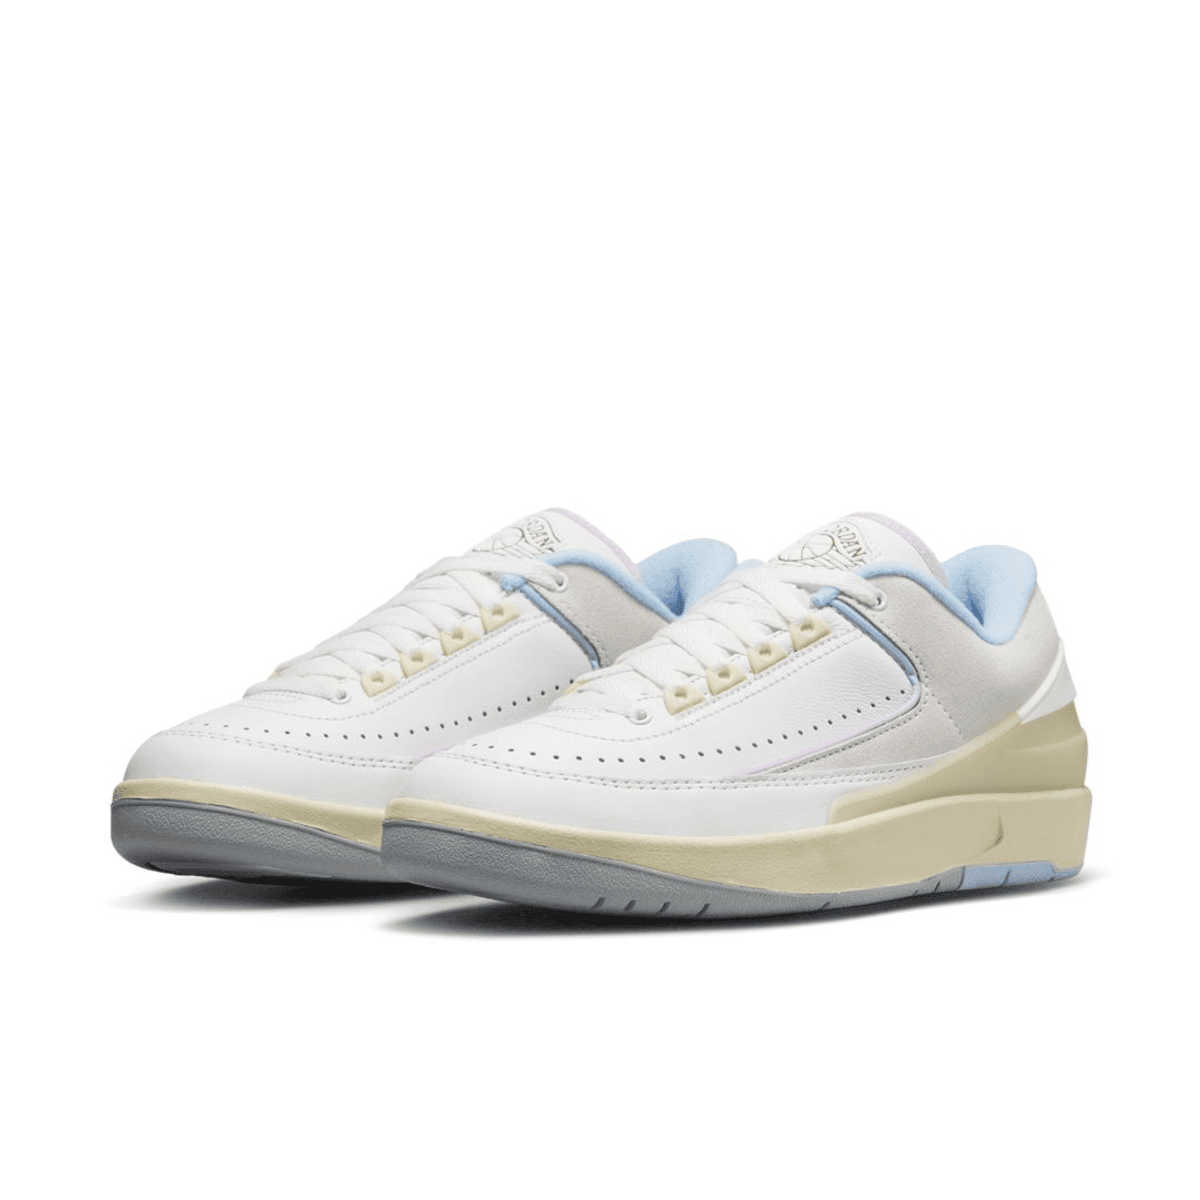 Women’s Air Jordan 2 Low “Look Up In The Air” Is Ready To Take Flight